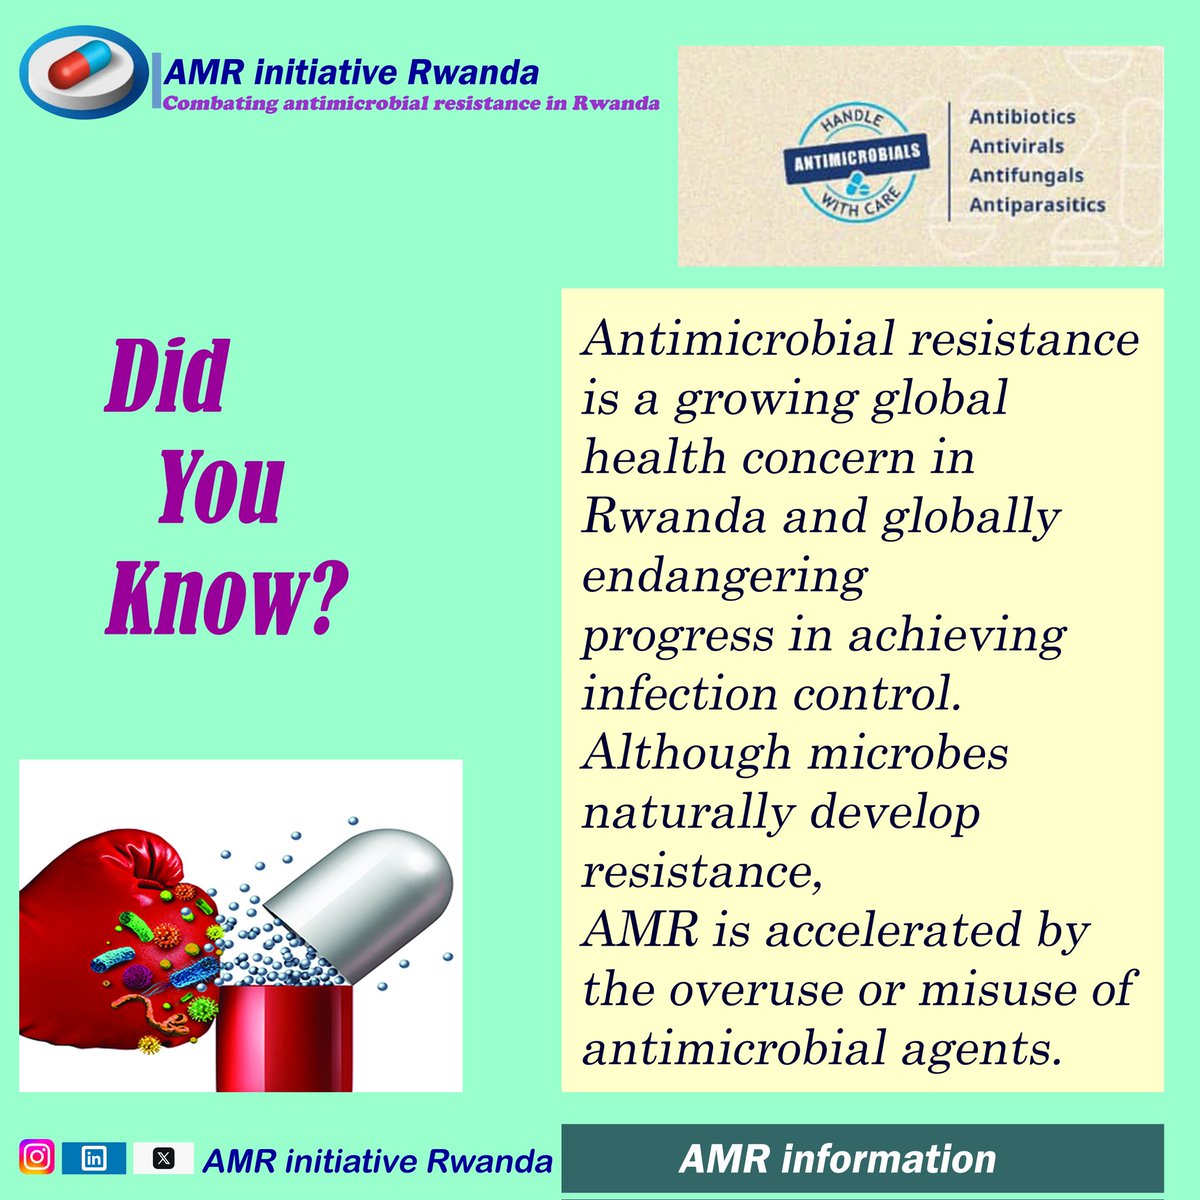 #AMR is a global concerns that doesn't discriminate- It affects human, animals and the Environment. #Superbugs make treatment tougher yet simple steps like appropriate vaccinations, good hygiene practices and responsible use of Antimicrobials can make a difference. #OneHealth